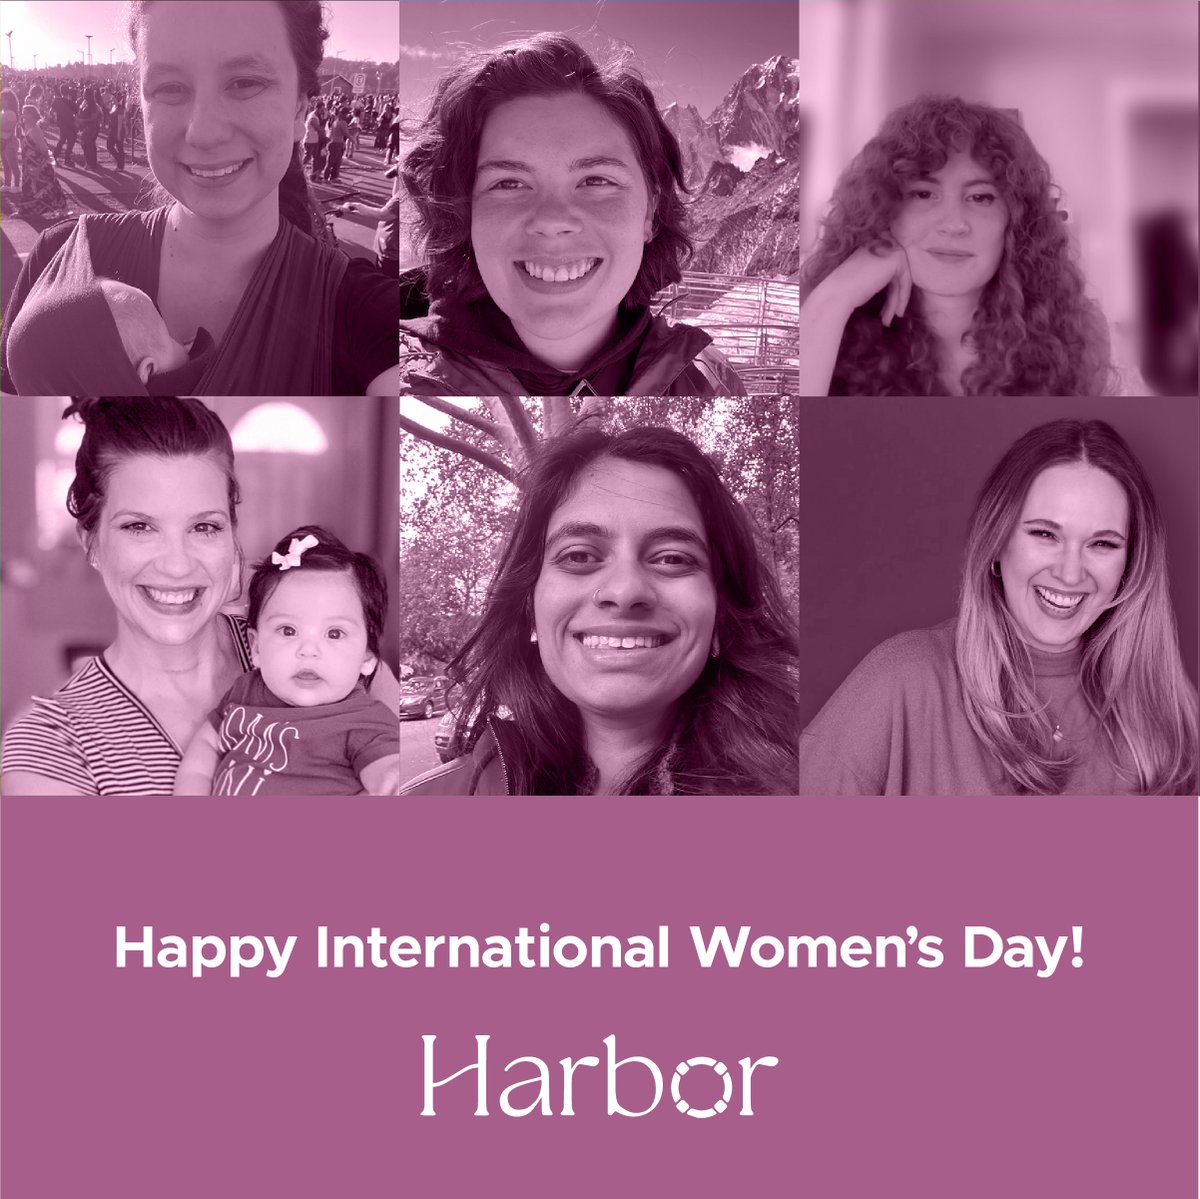 Happy International Women's Day! Celebrating the women behind Harbor today and every day. #InternationalWomansDay